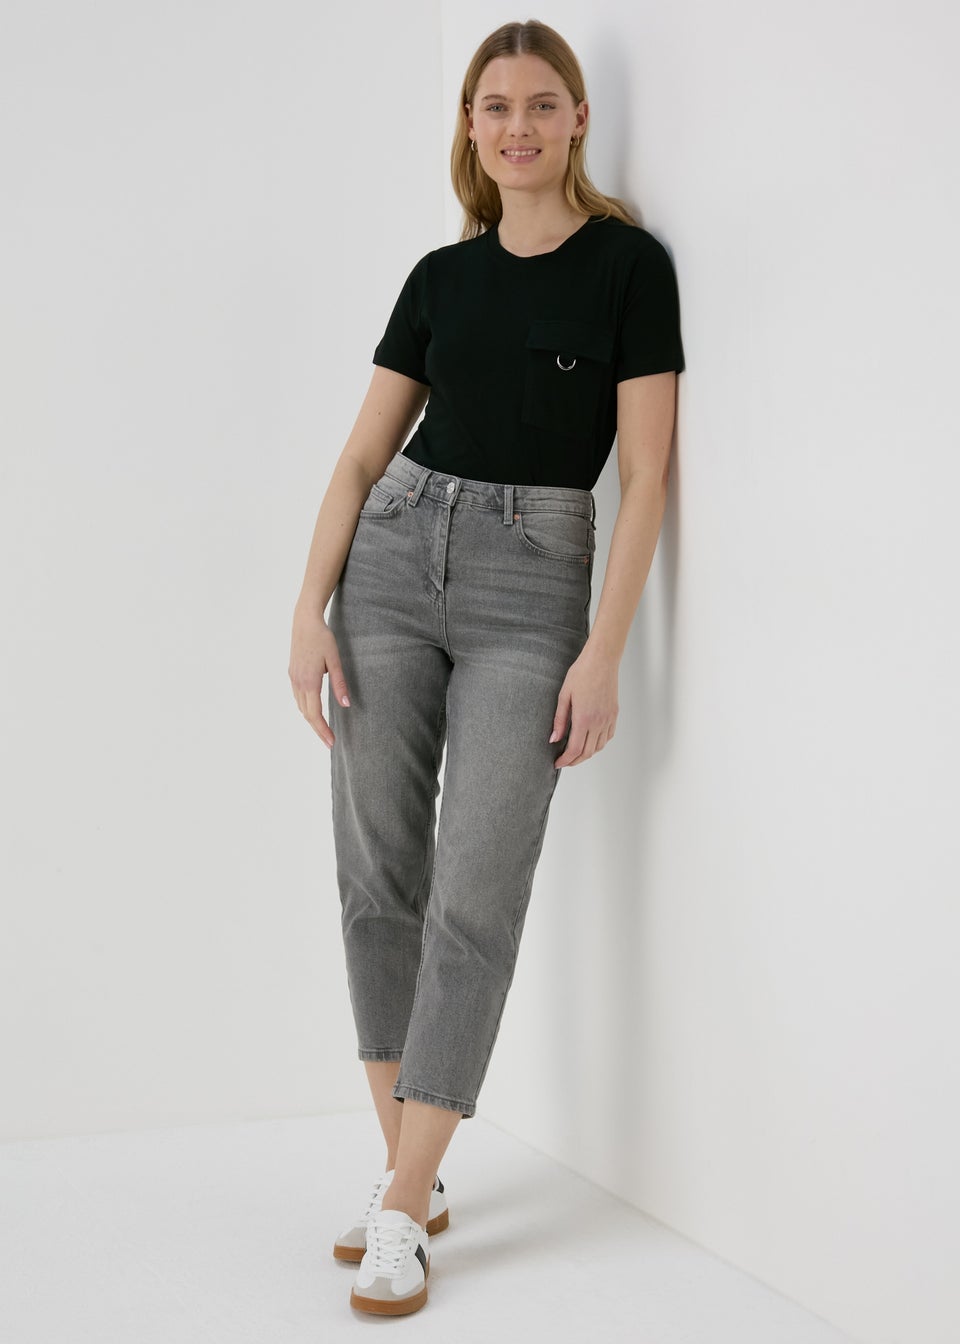 Grey Washed Mom Jeans